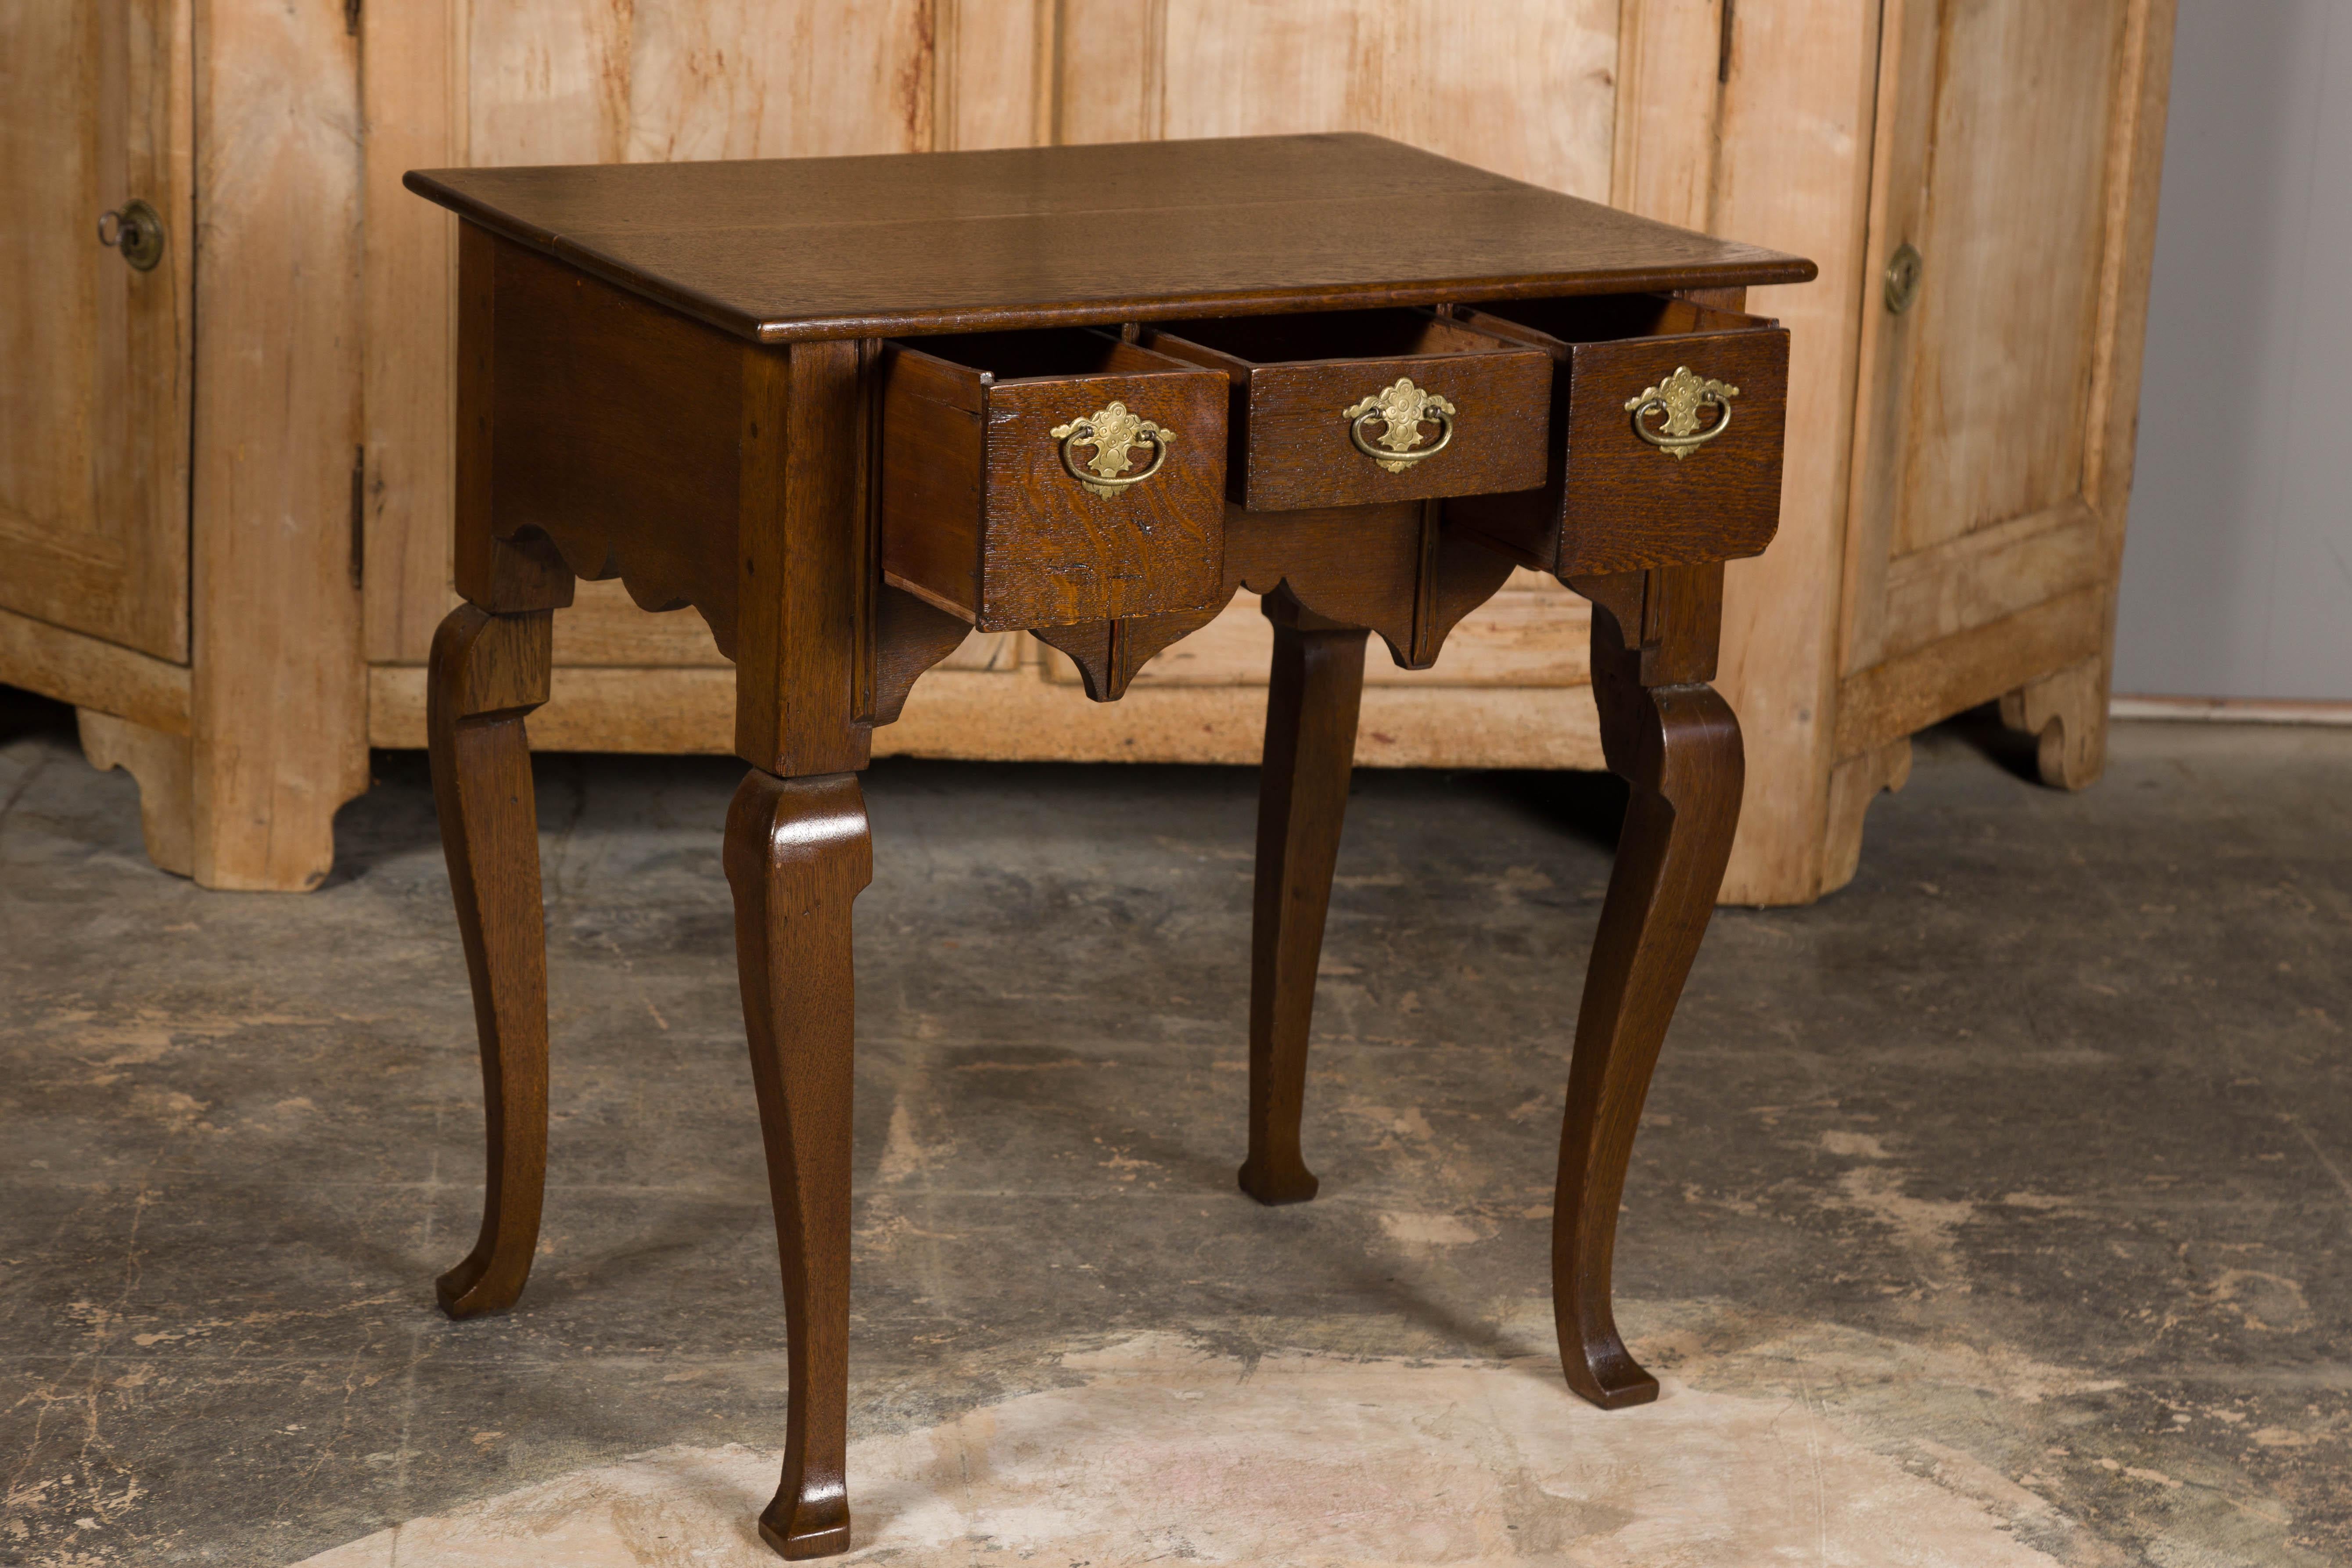 English Georgian 19th Century Oak Table with Three Drawers and Cabriole Legs For Sale 9